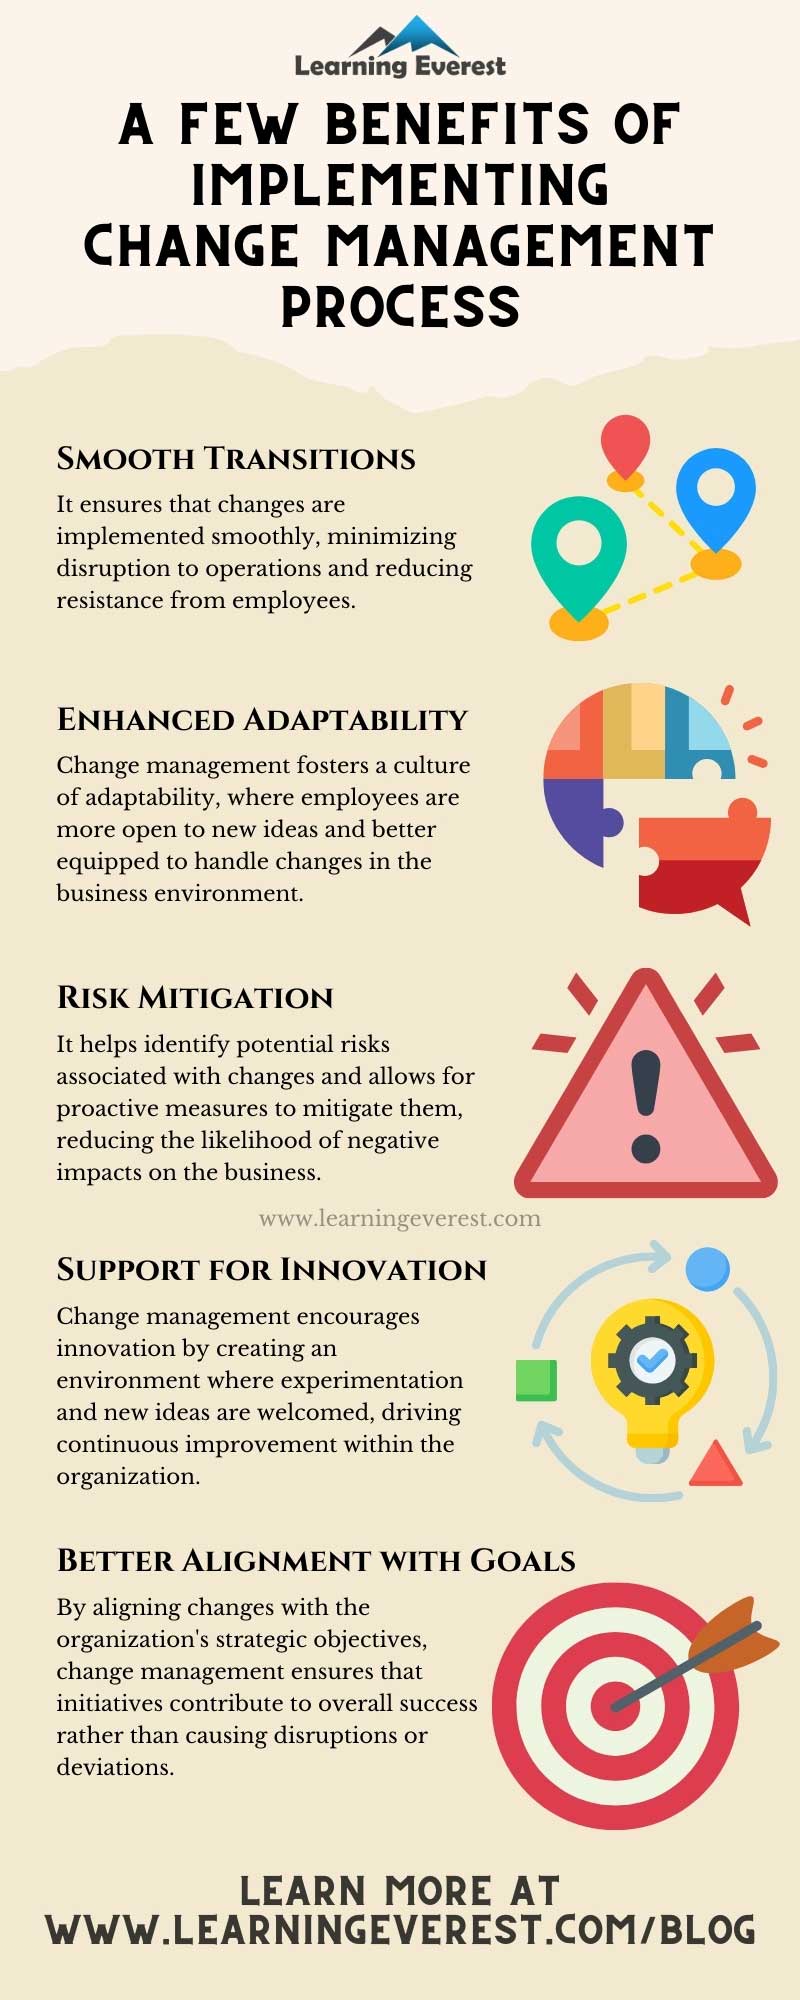 A Few Benefits of Implementing Change Management Process